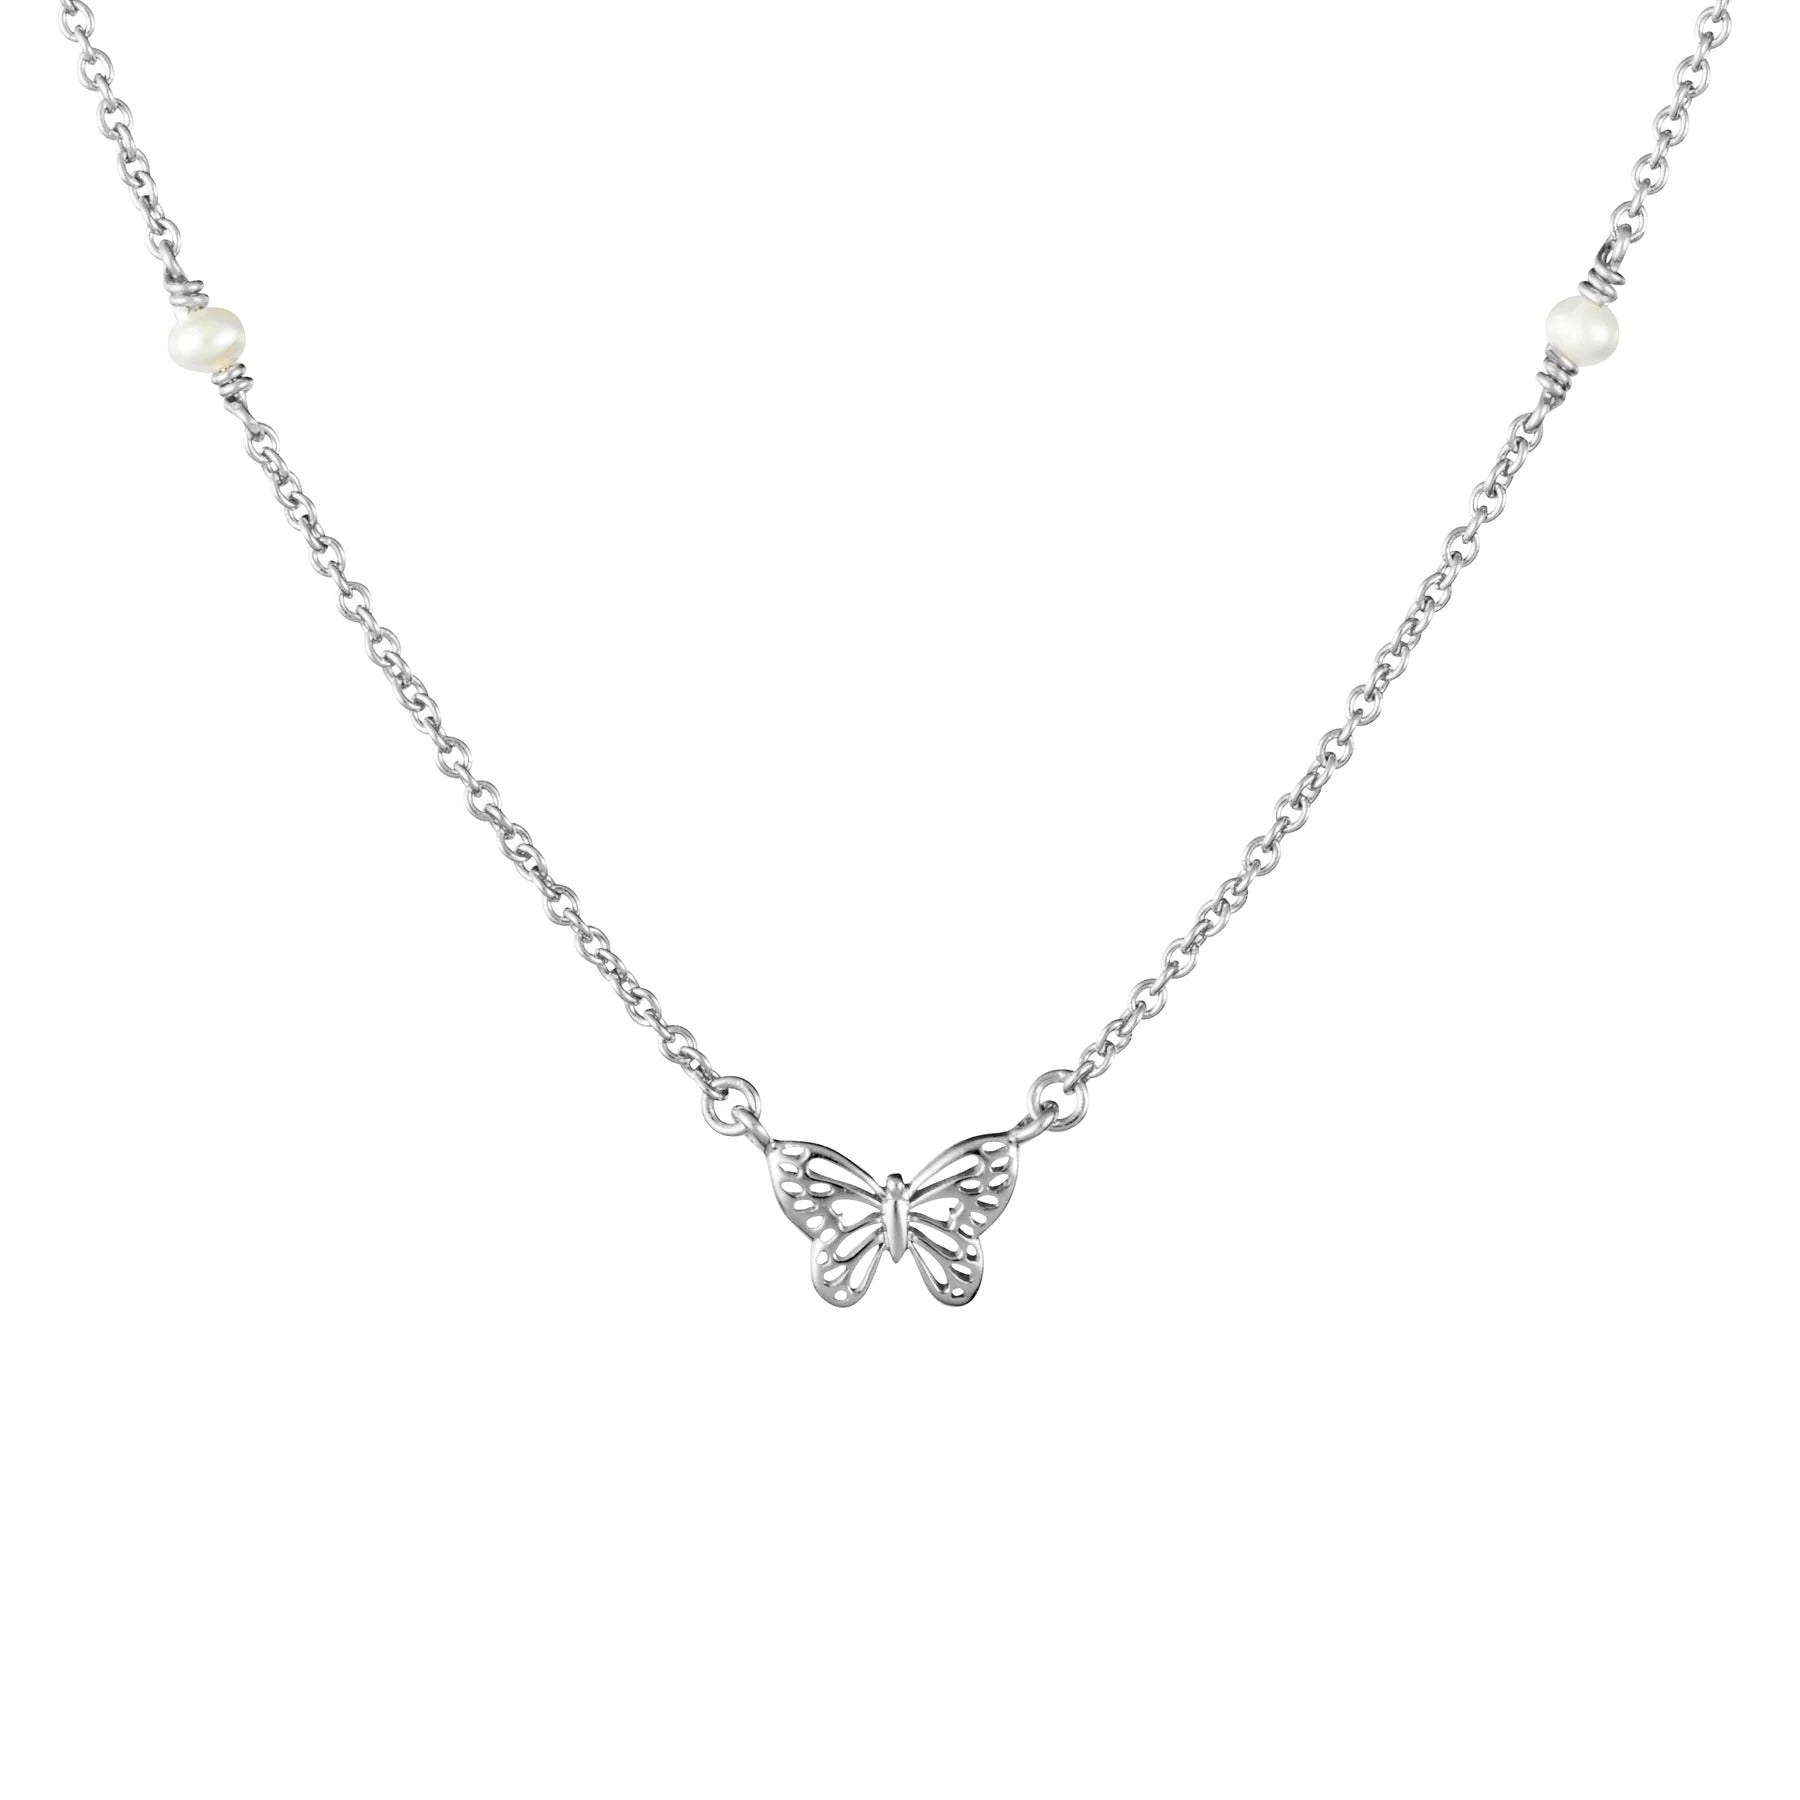 N638 - Butterfly Pearl Necklace